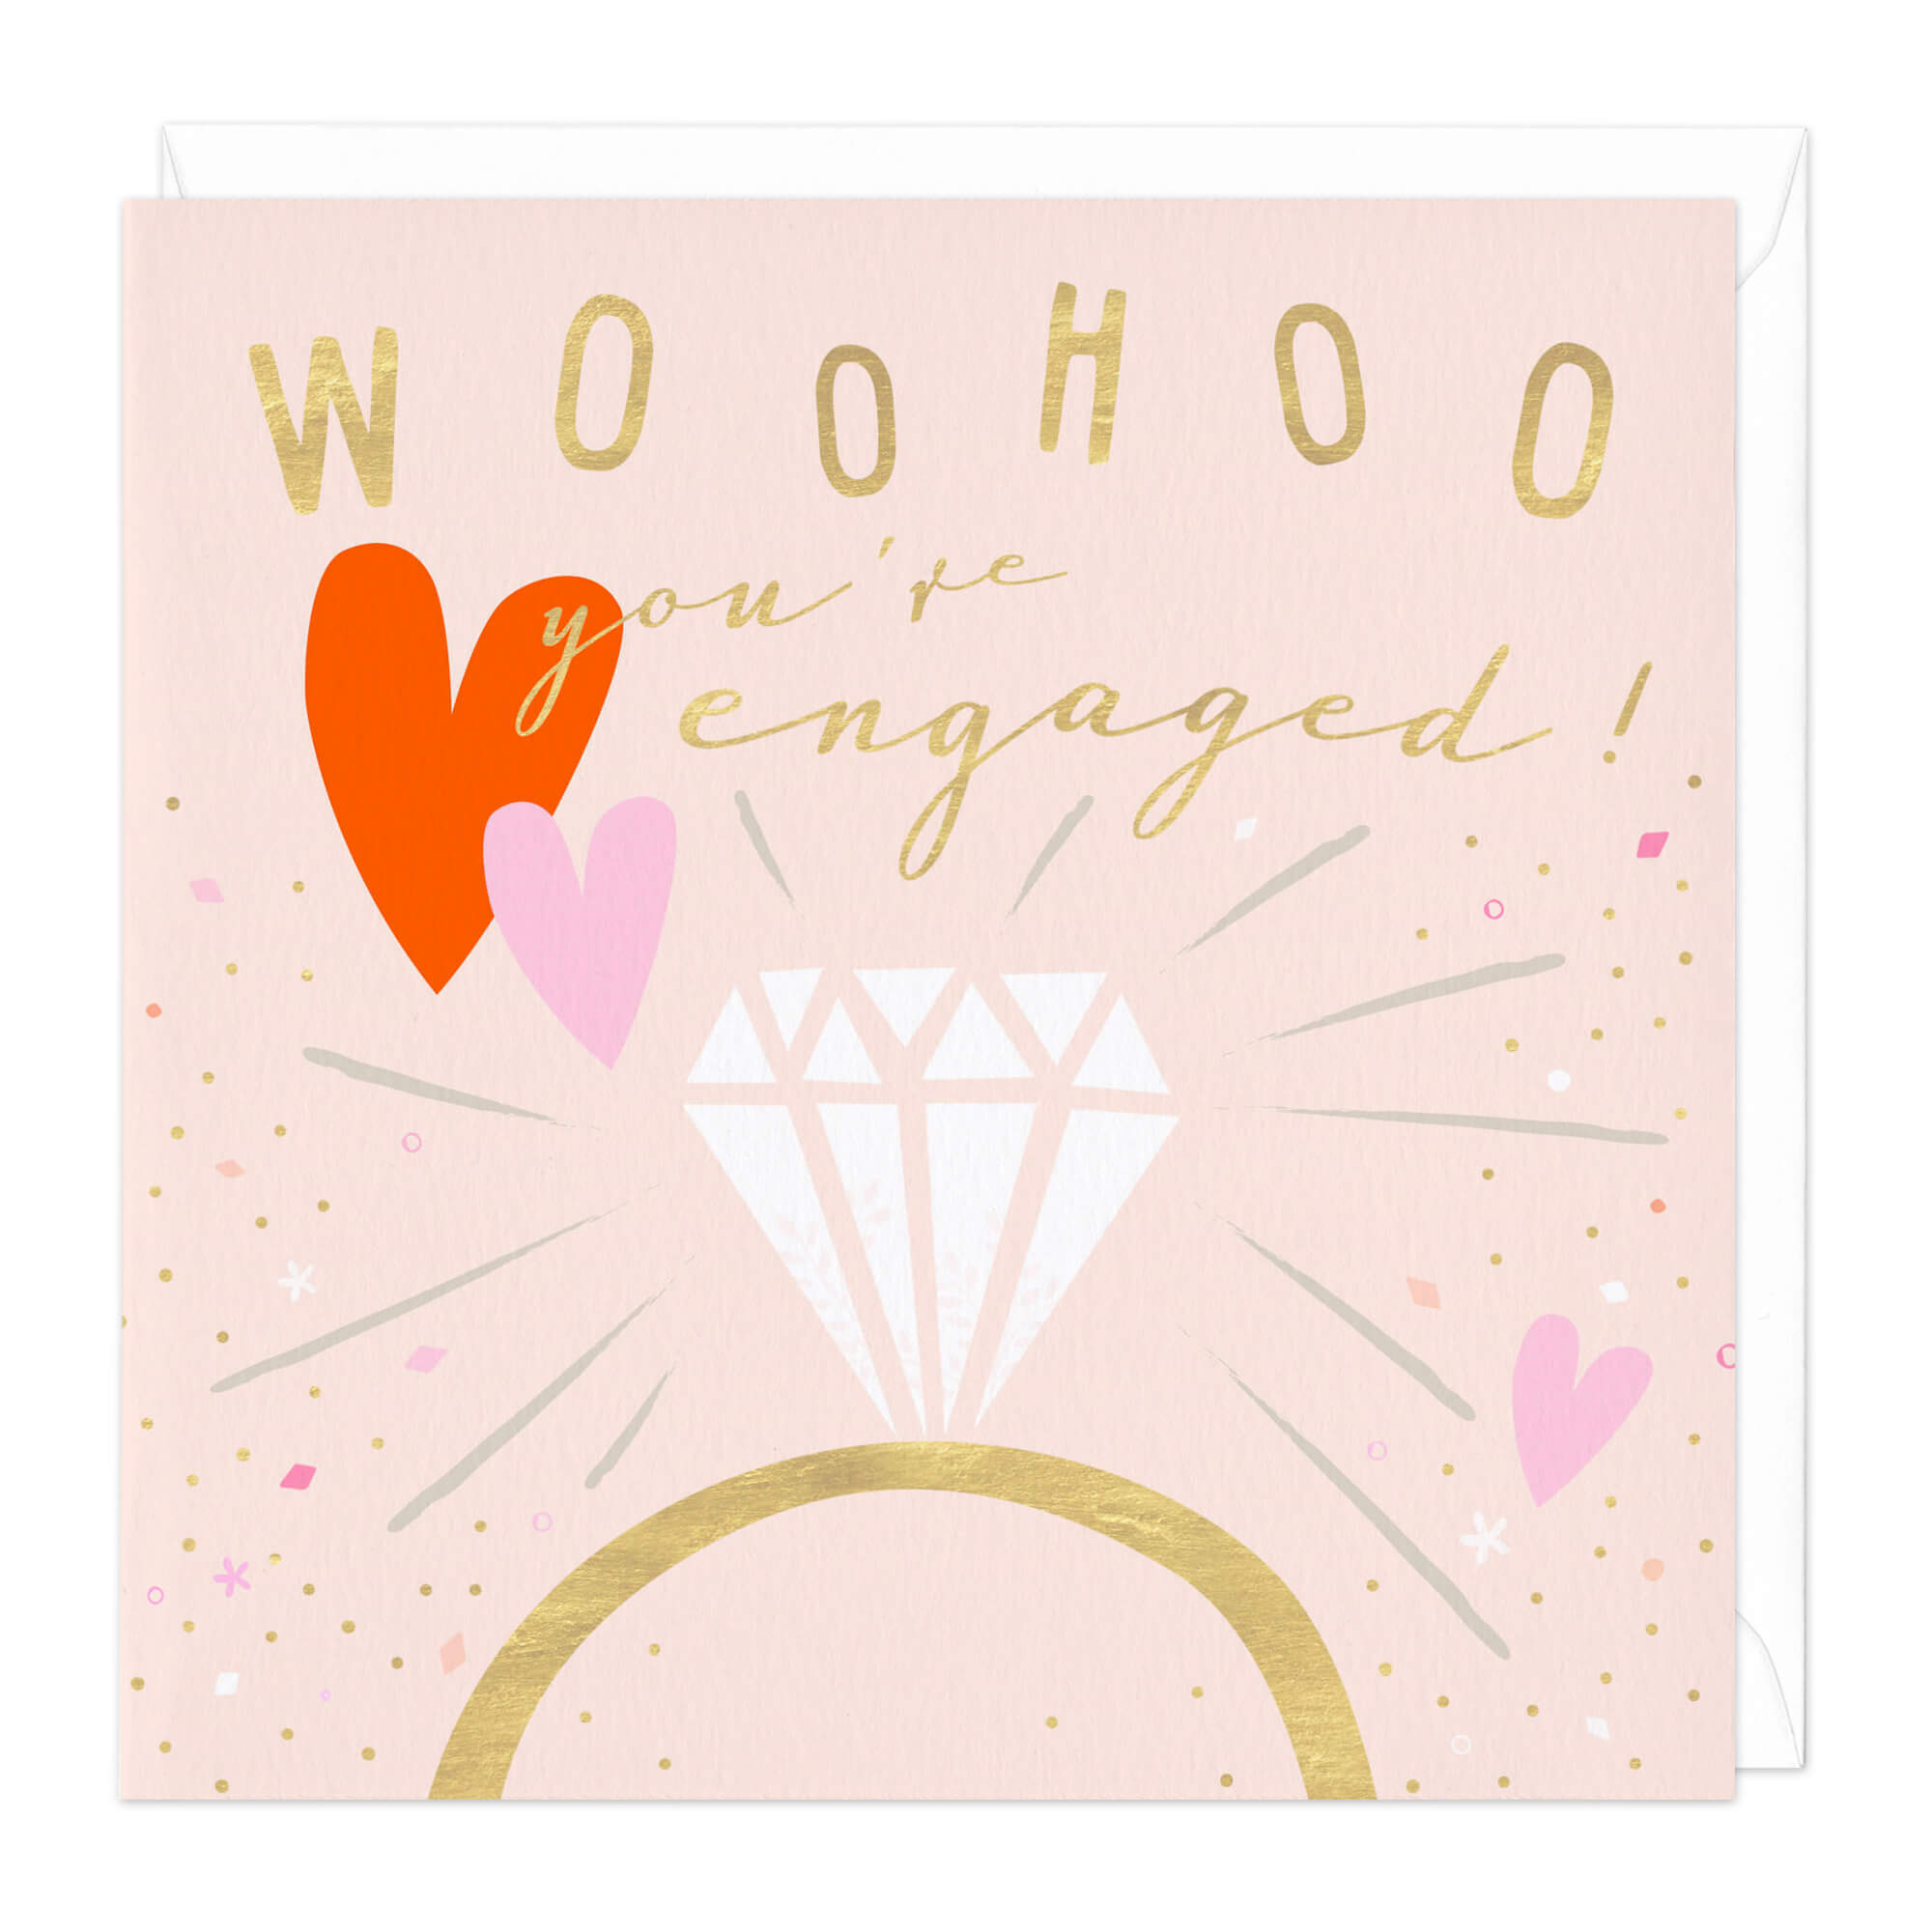 An image of Woo Hoo! Engagement Card Whistlefish